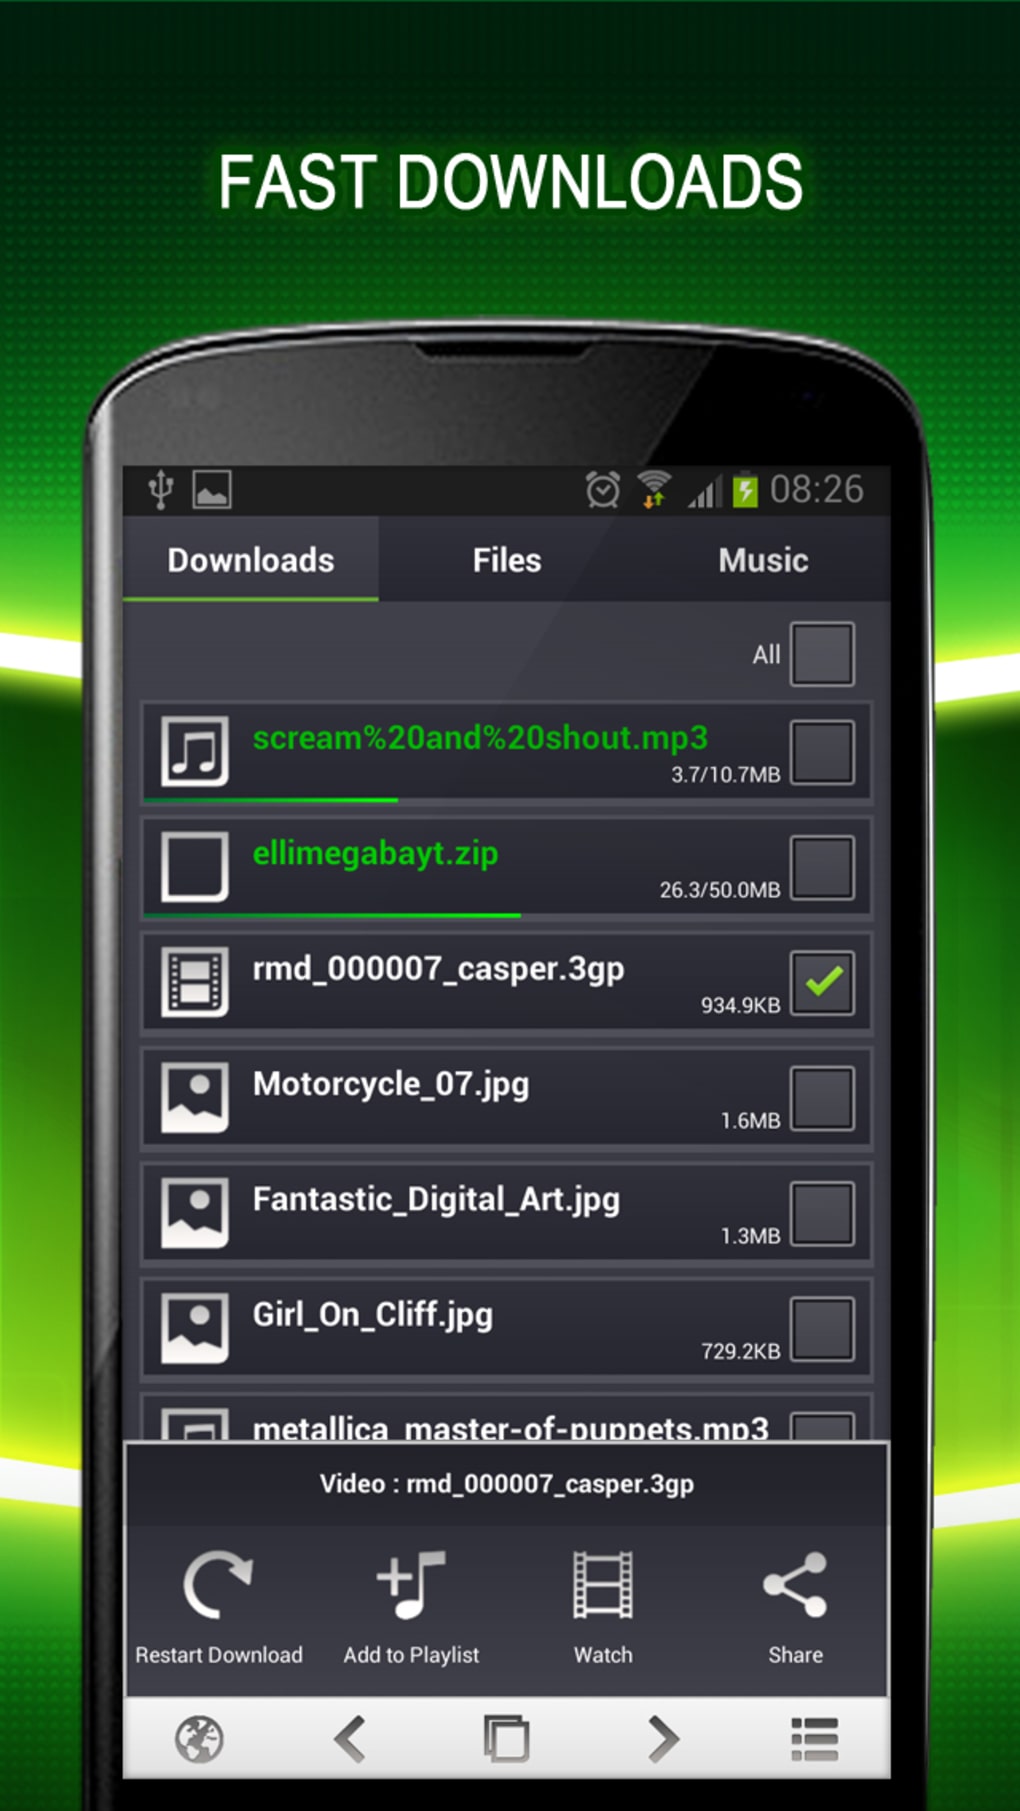 Download manager plus for android app